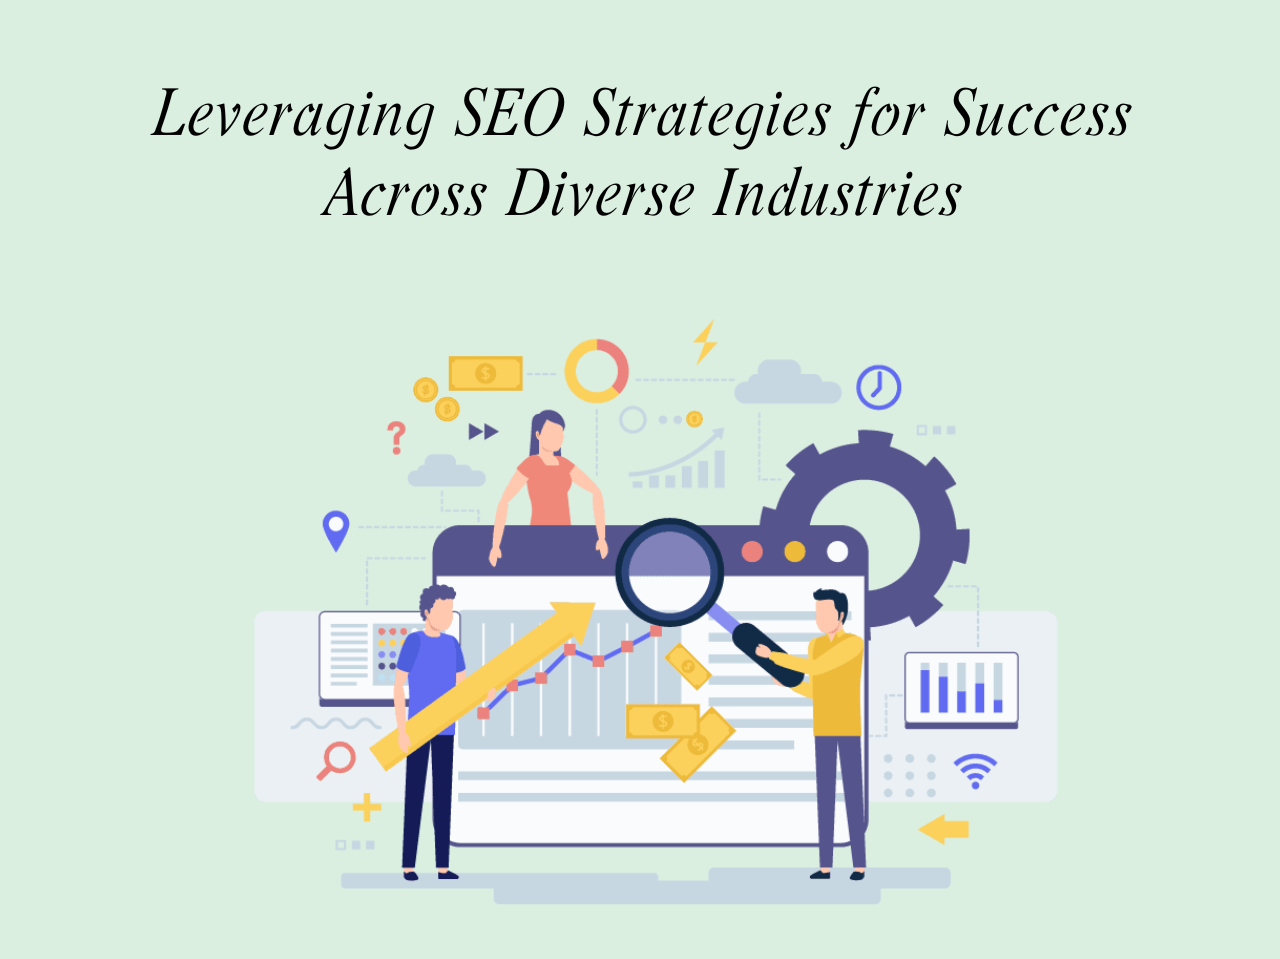 Leveraging SEO Strategies for Success Across Diverse Industries